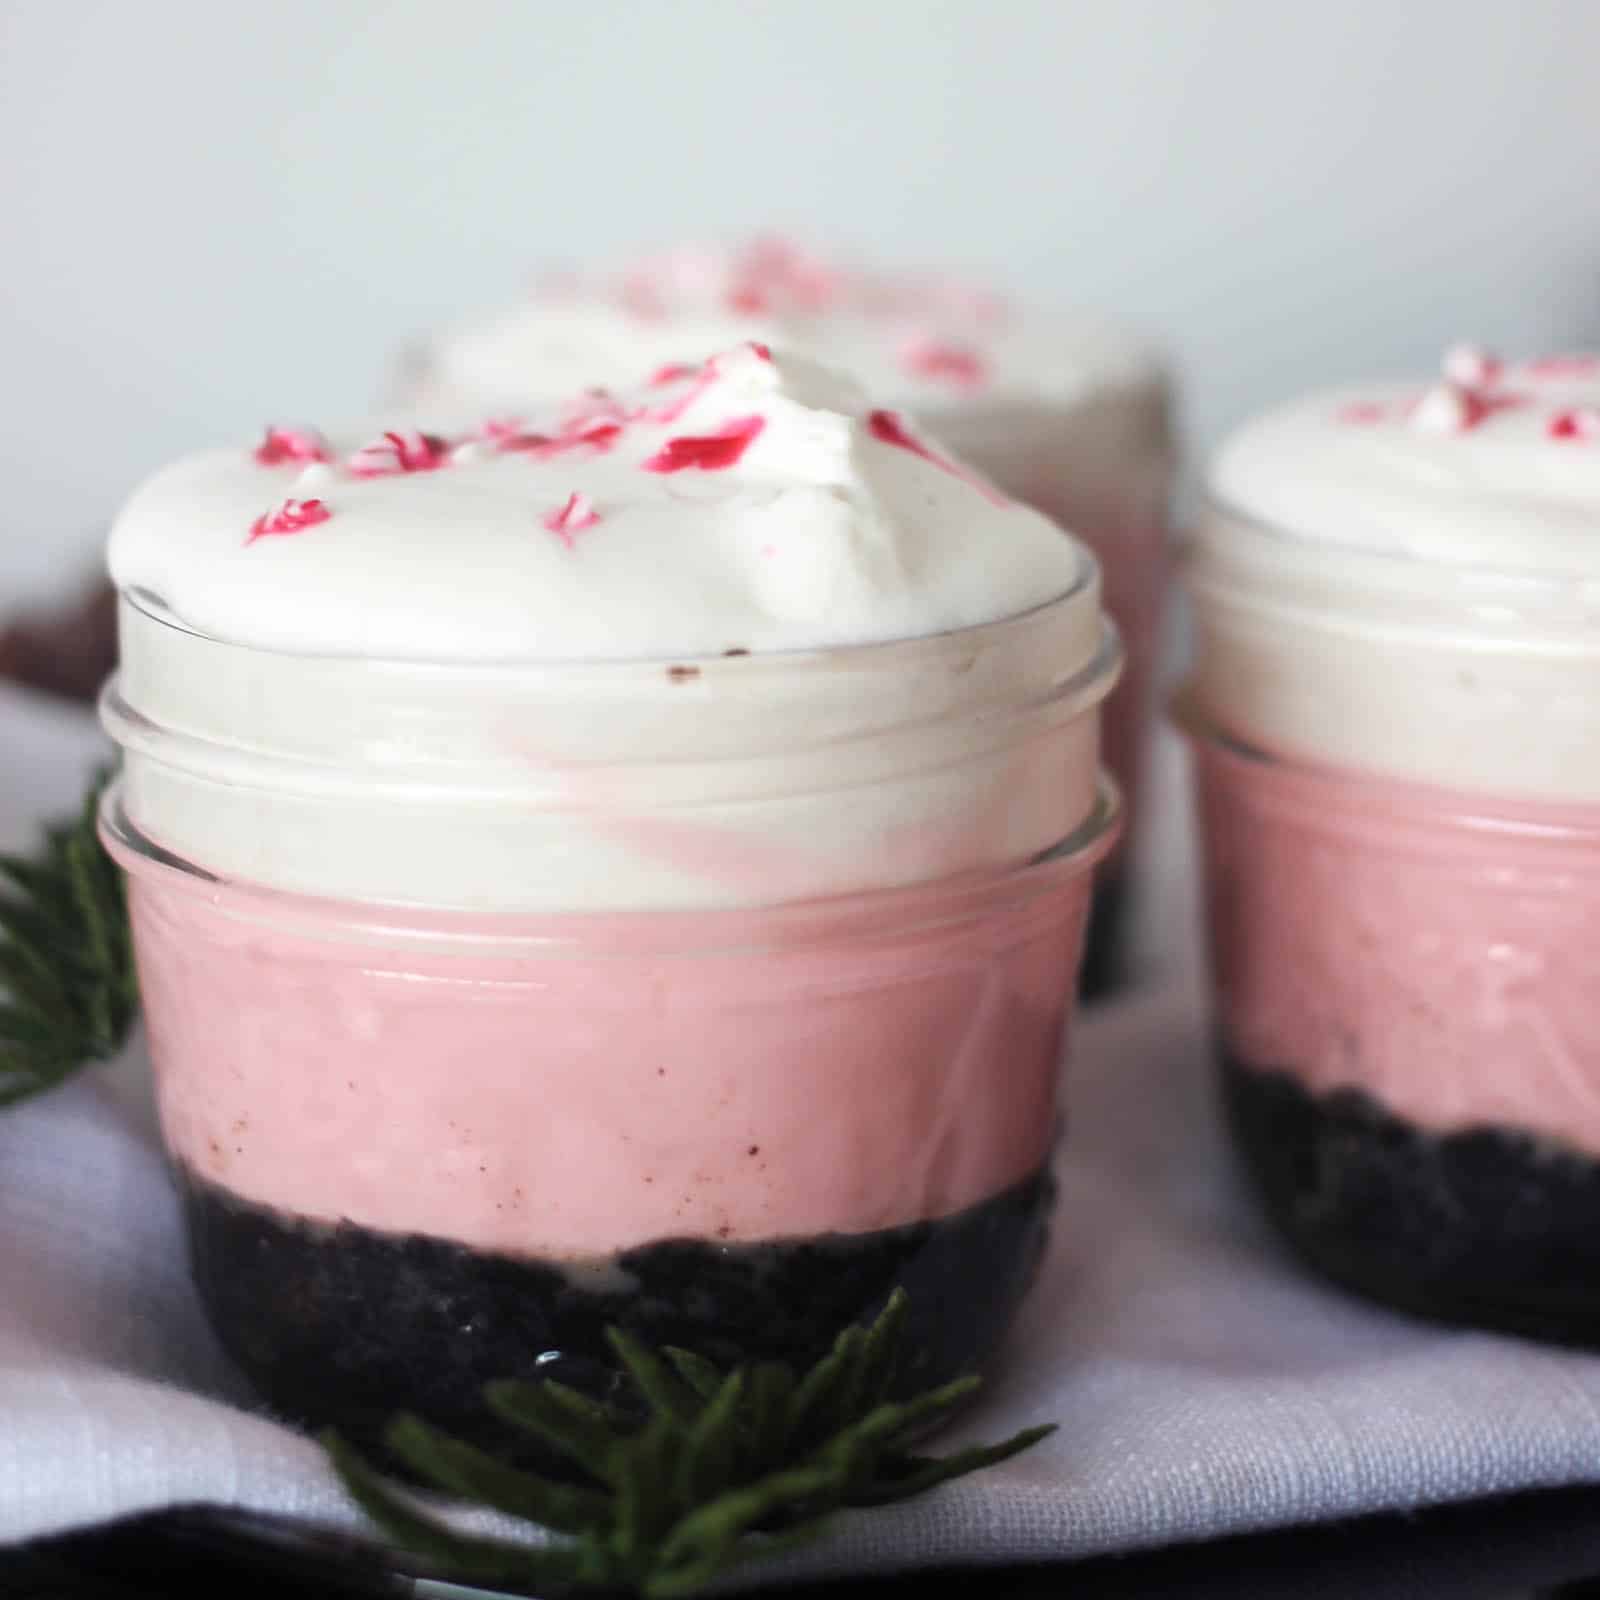 Looking for a quick and easy dessert? Try this no bake mini cheesecake recipe! These pink desserts are perfect for Valentine's Day, Bachelorettes, girls weekends, or just because!